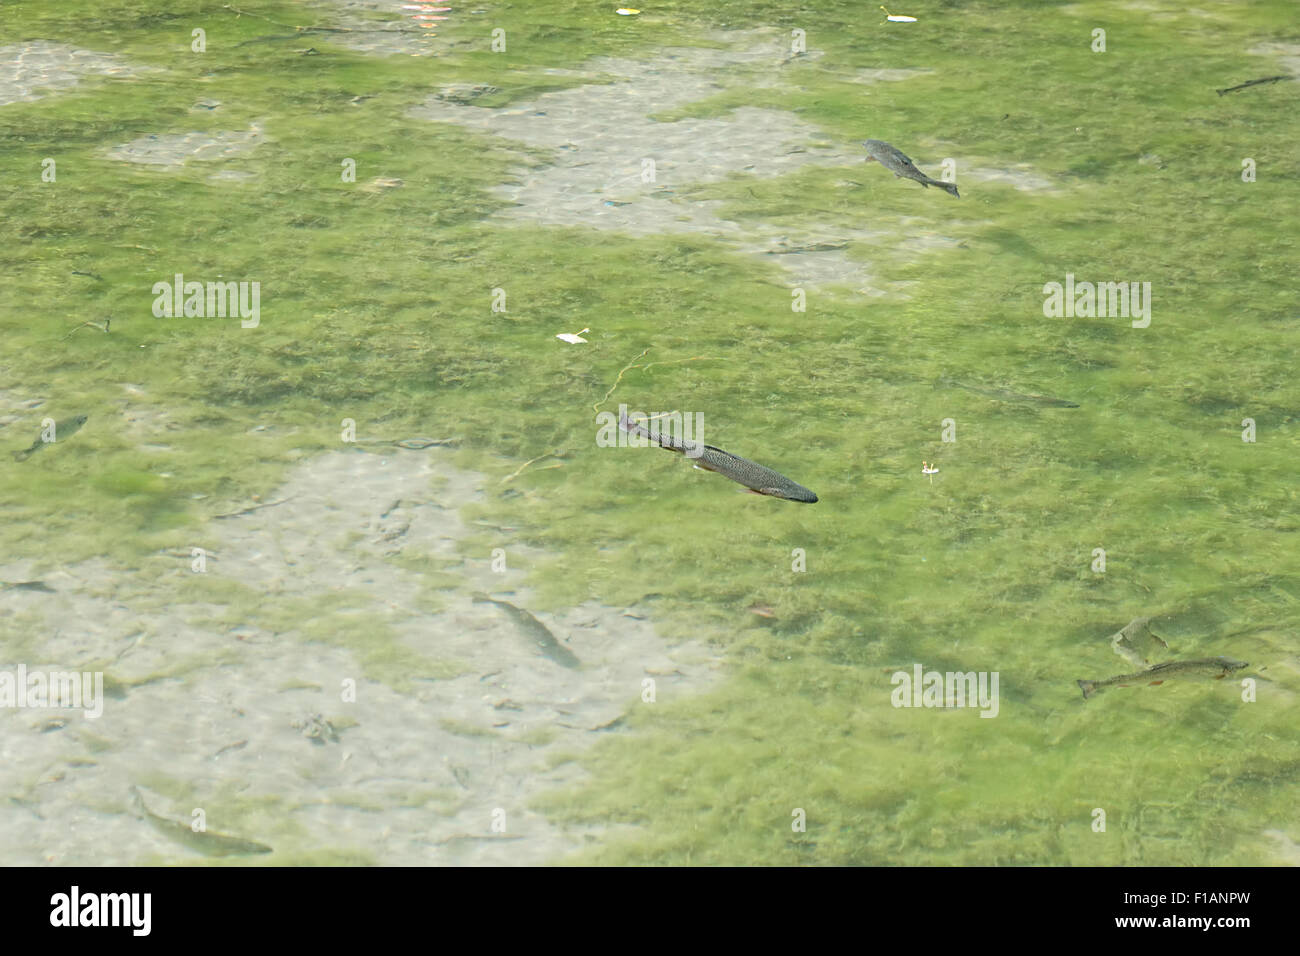 Fish, trout, swimming in clean mountain pond. Stock Photo